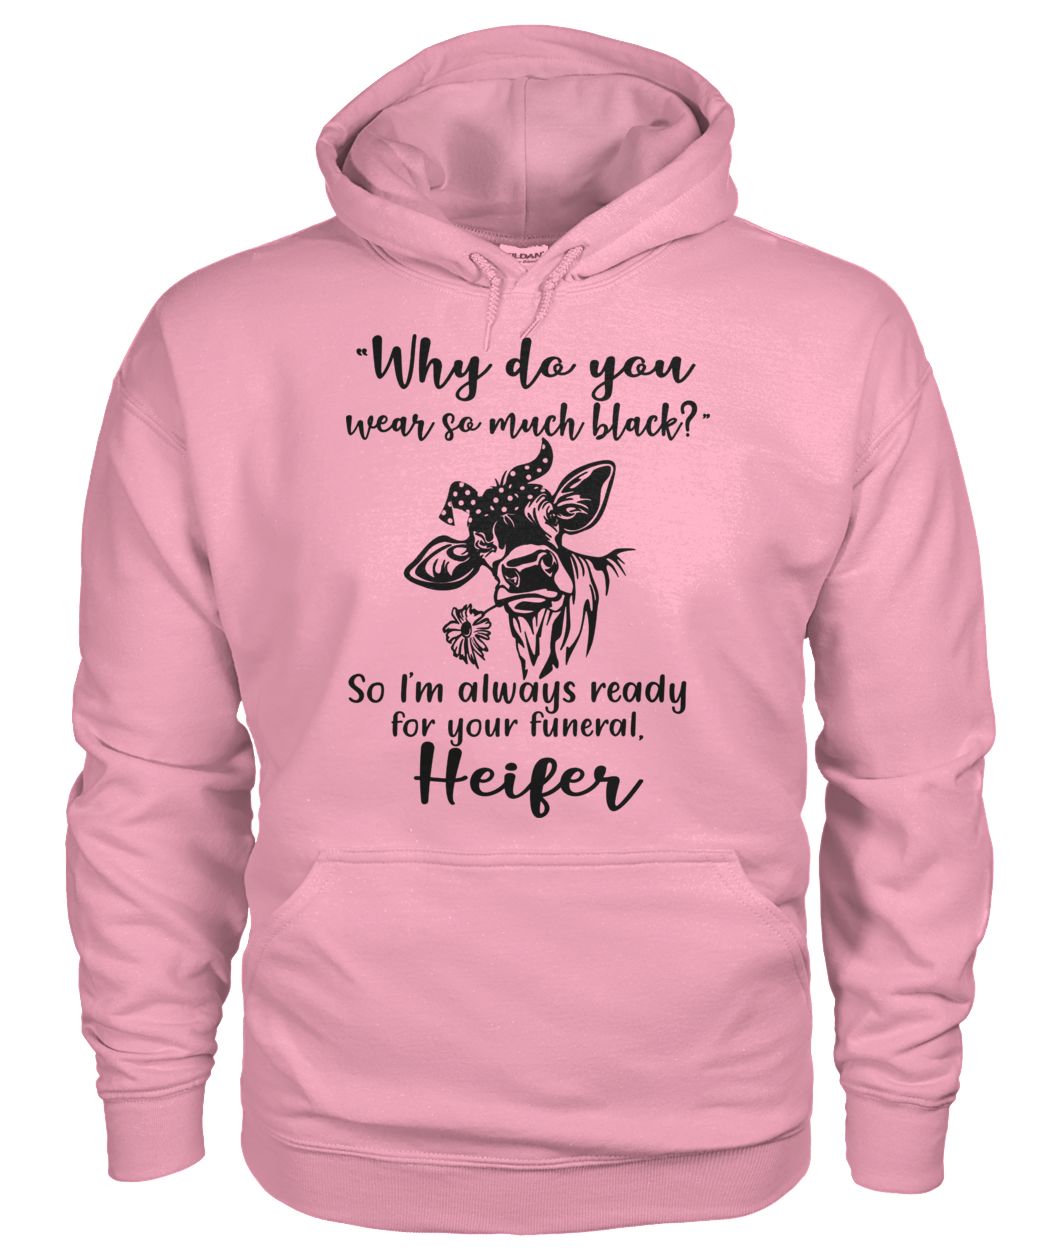 Heifer why do you wear so much black so i'm always ready for your funeral gildan hoodie